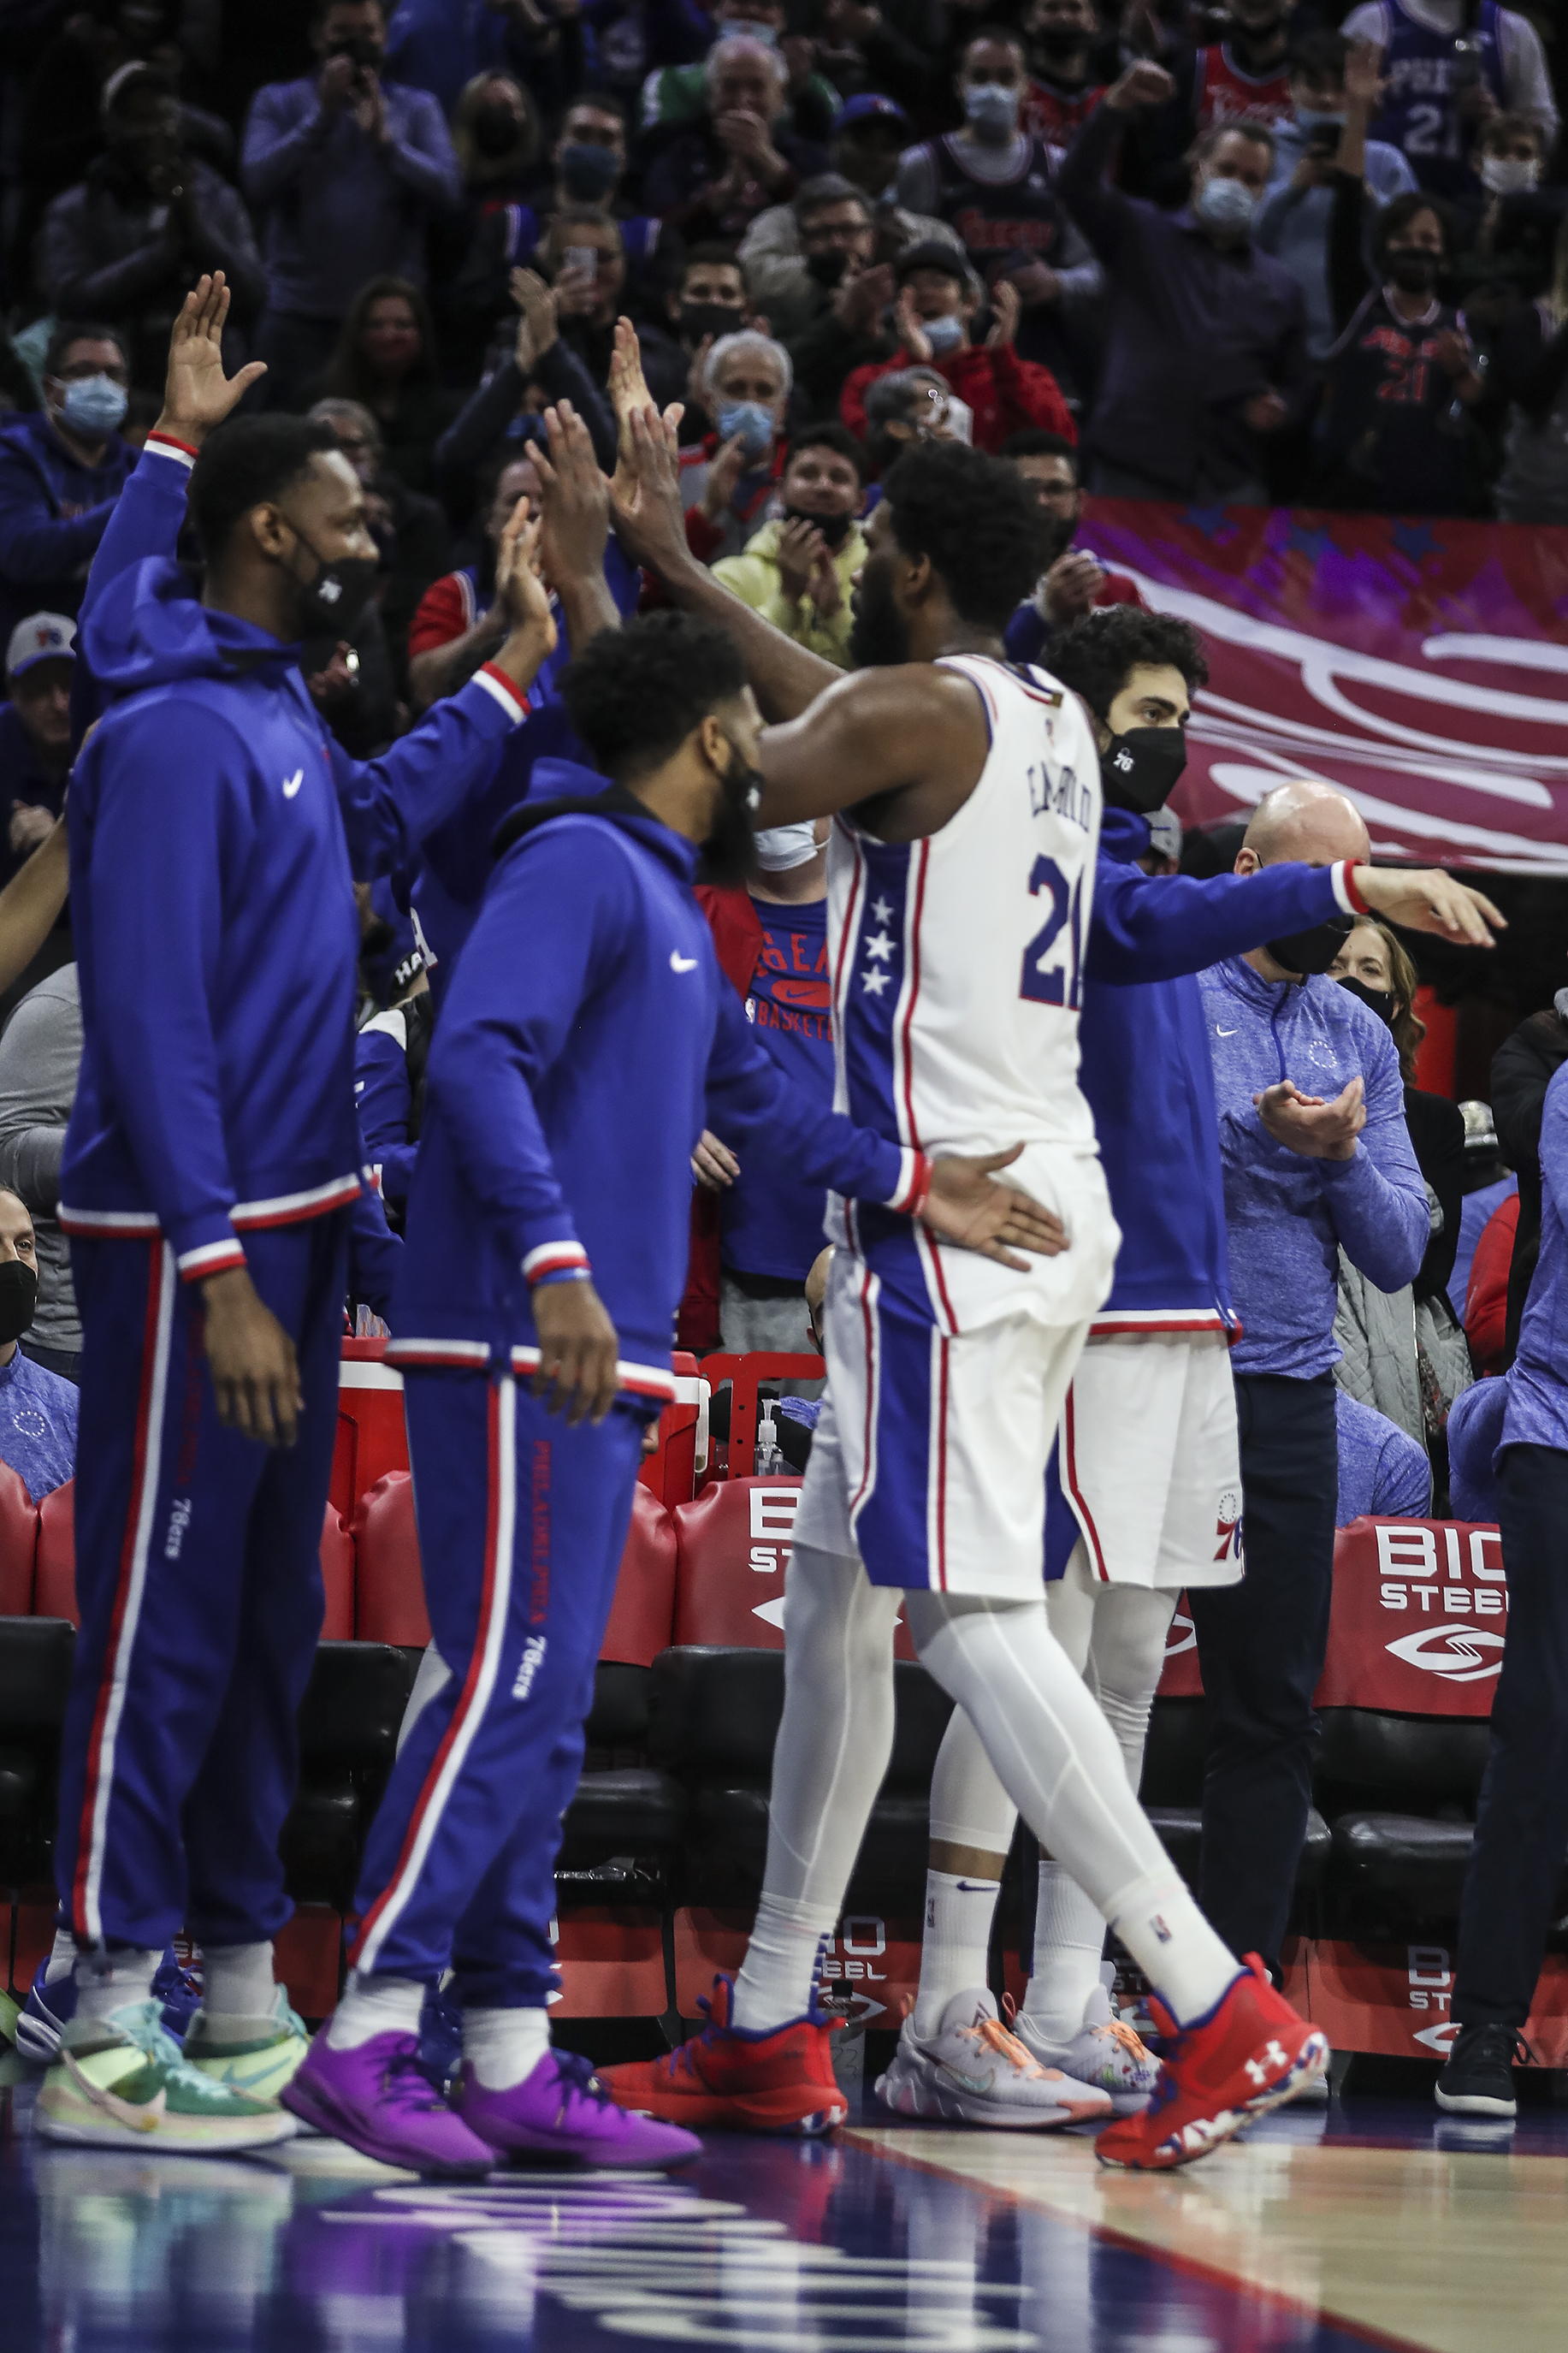 NBA MVP Joel Embiid Nearing Sneaker Deal With Skechers - Sports Illustrated  FanNation Kicks News, Analysis and More